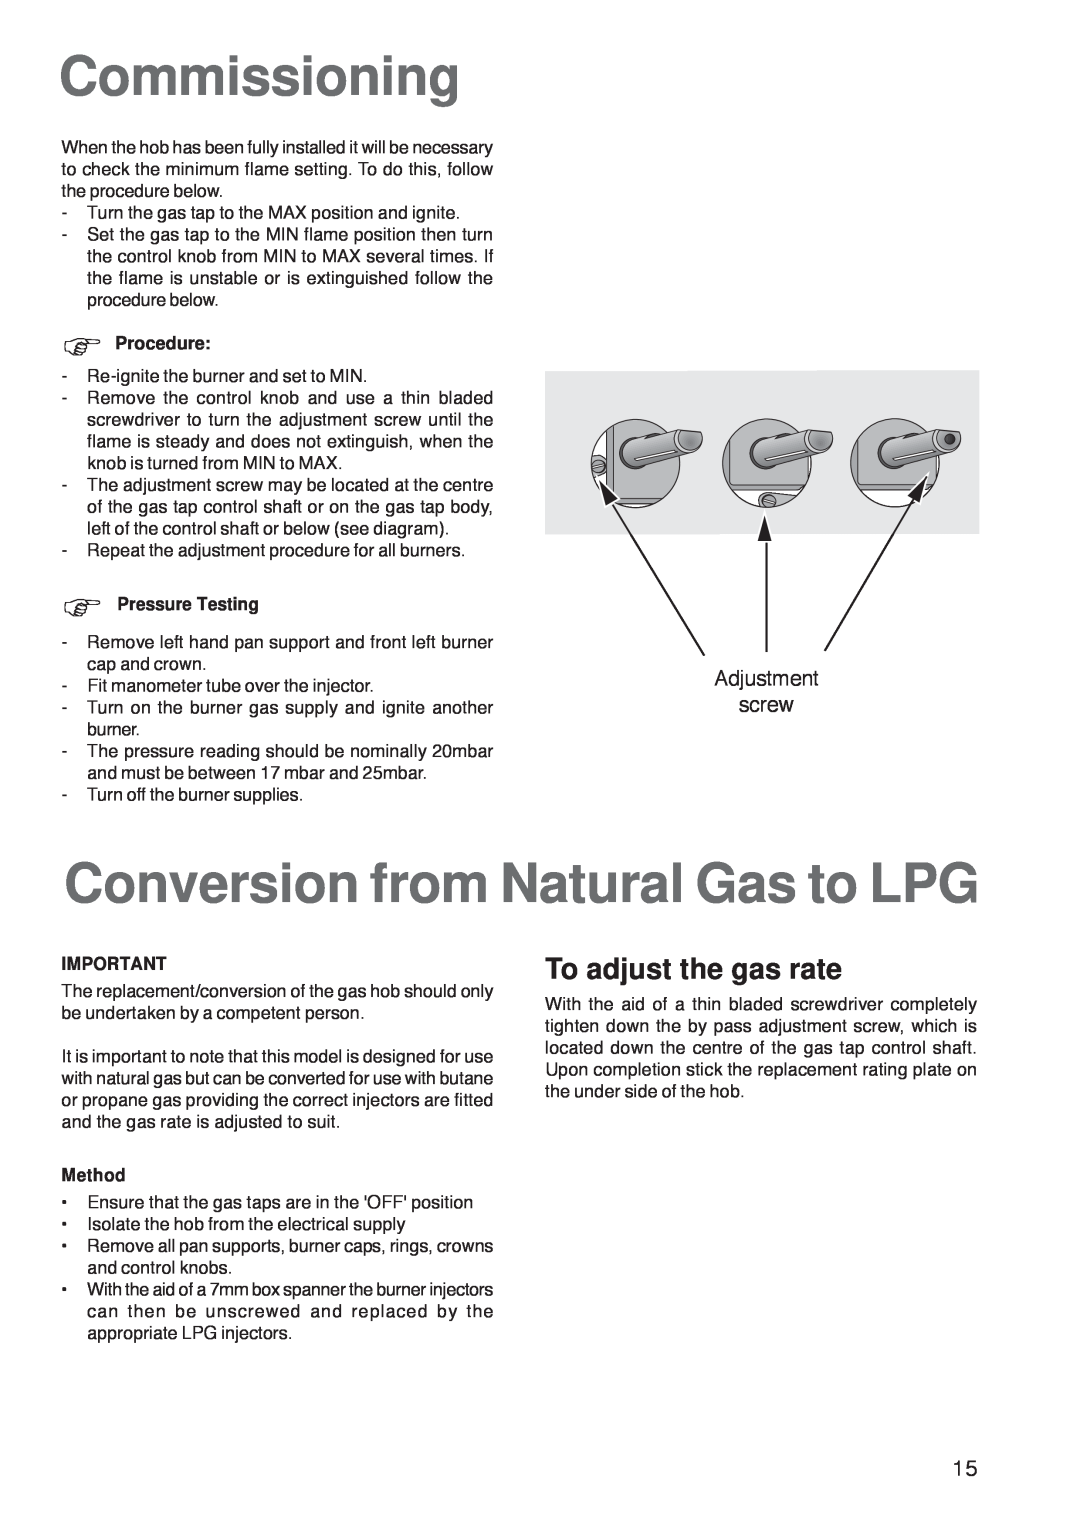 Zanussi ZGL 62 ITX Commissioning, Conversion from Natural Gas to LPG, To adjust the gas rate, Adjustment screw, Procedure 